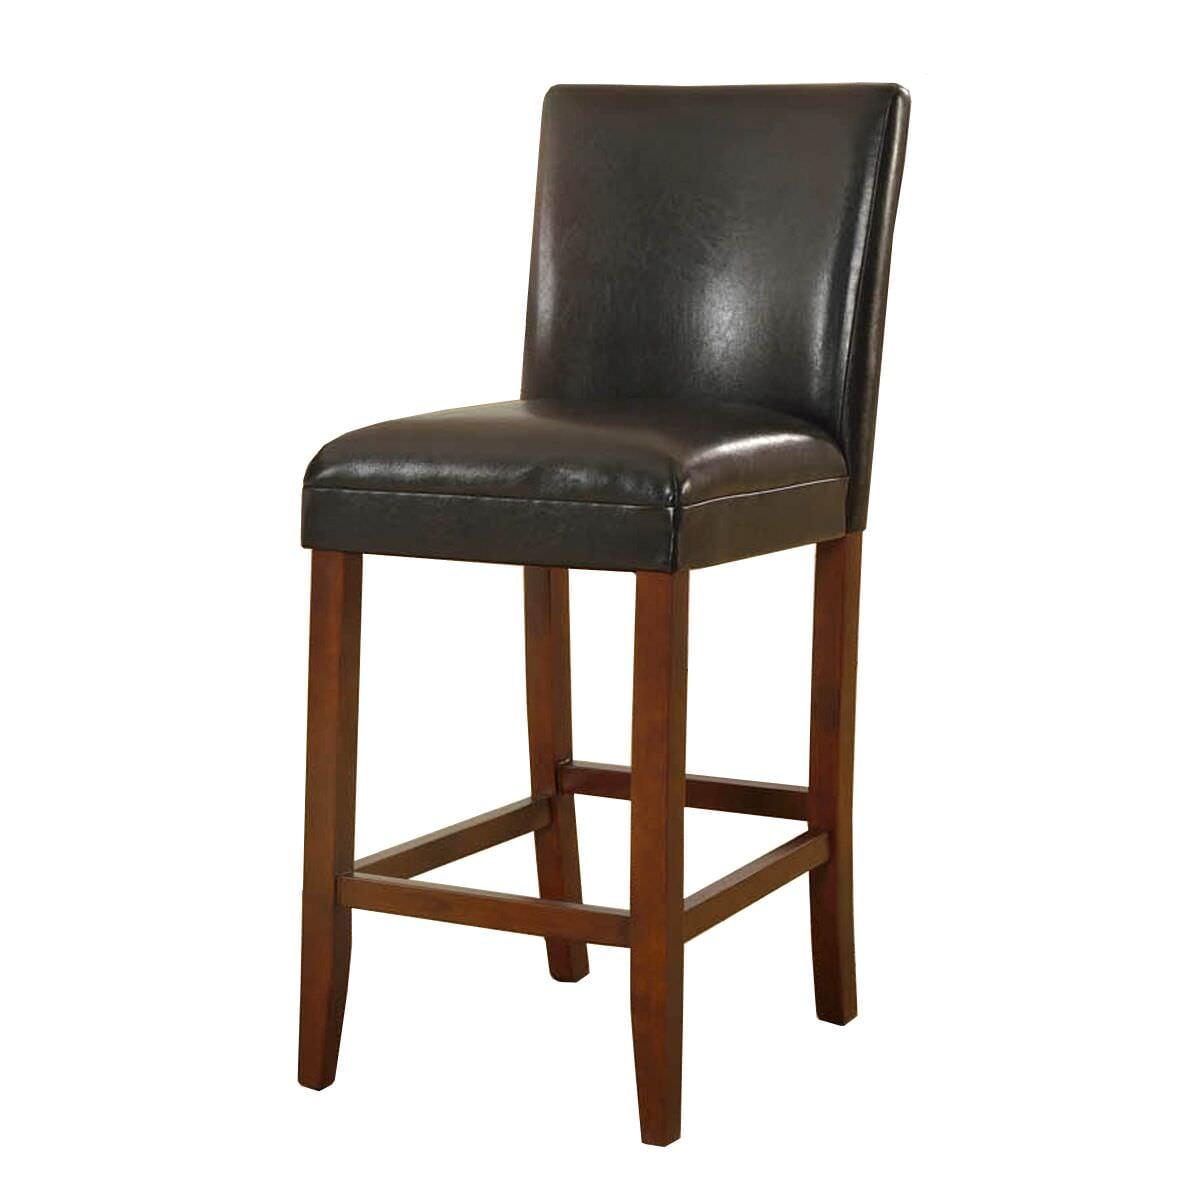 Luxury Black Faux Leather 29" Barstool with Light Cherry Wood Legs